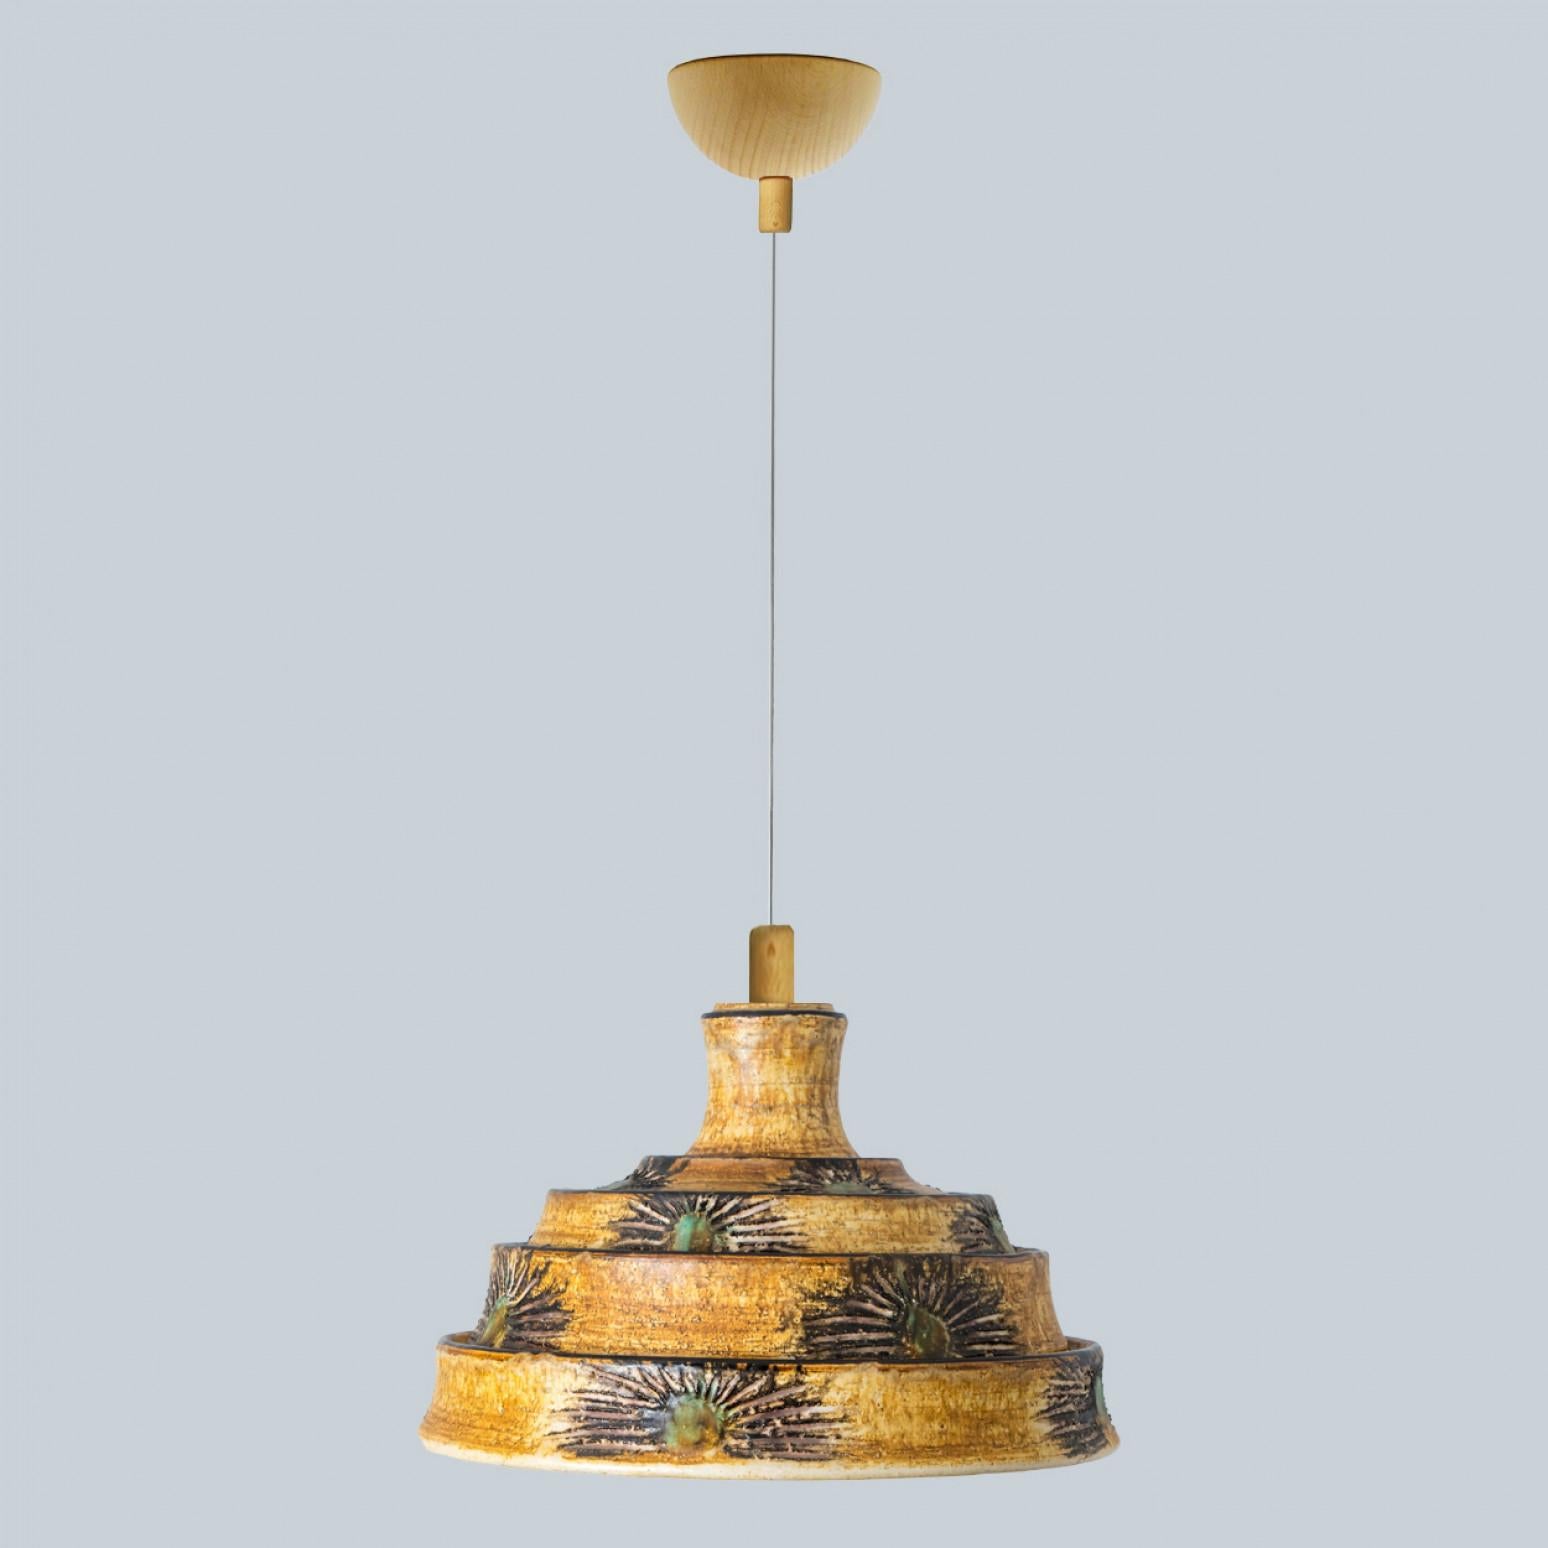 Stunning round hanging lamp with an unusual shape, made with rich brown and yellow colored ceramics, manufactured in the 1970s in Denmark. We also have a multitude of unique colored ceramic light sets and arrangements, all available on the